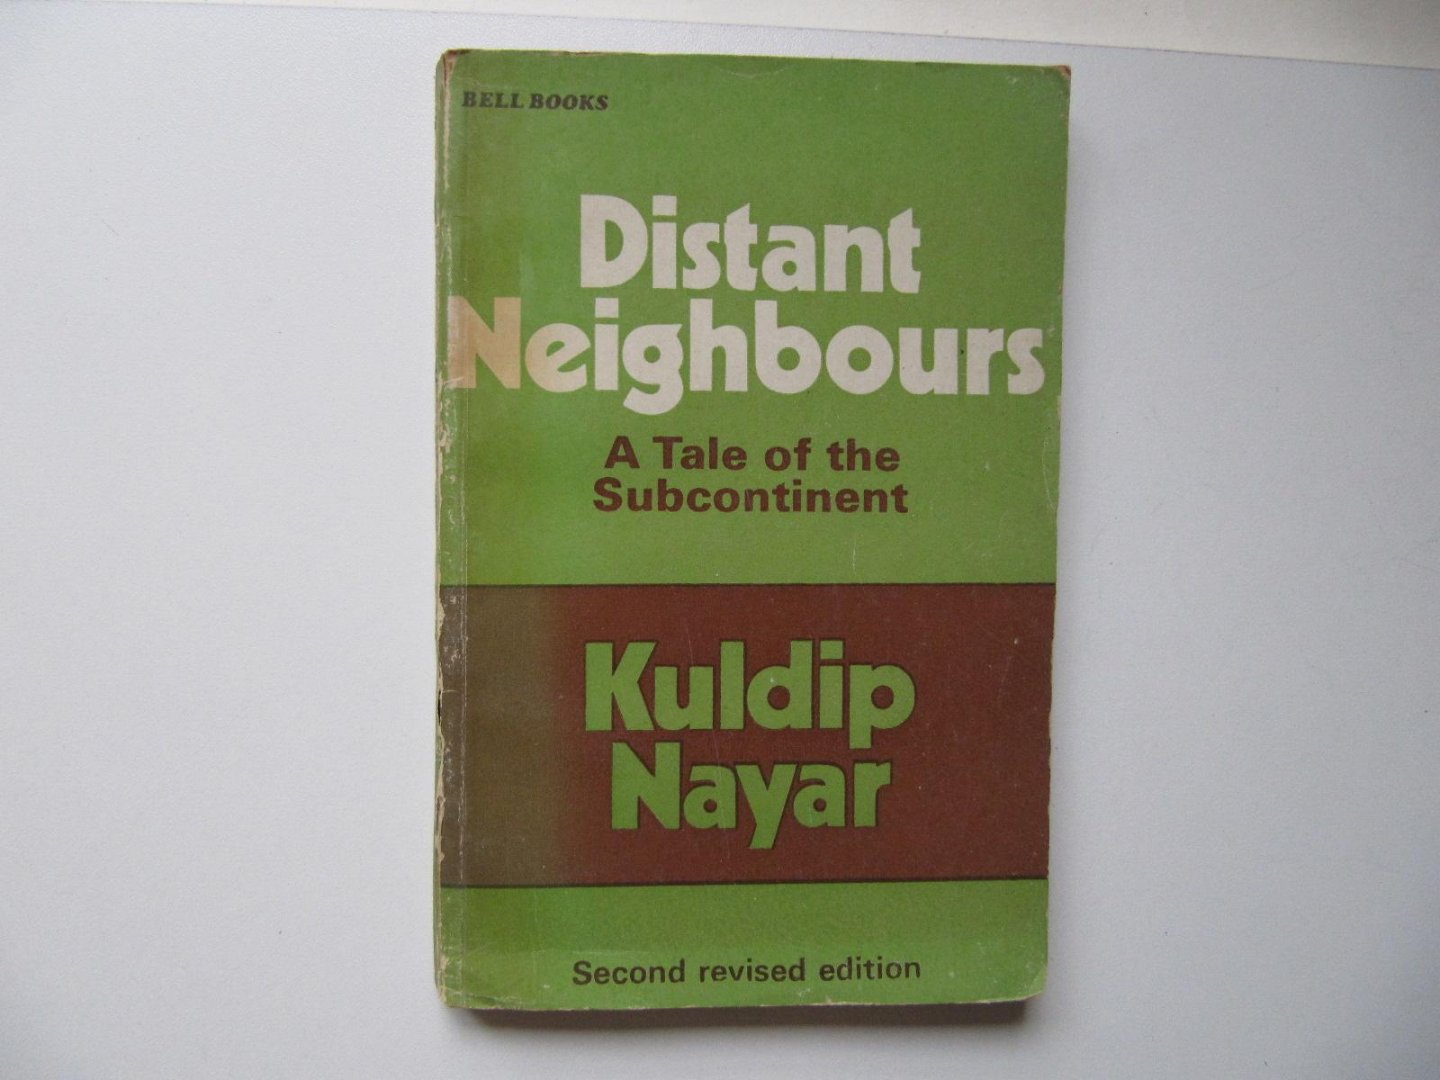 Kuldip Nayar - Distant Neighbours - A Tale of the Subcontinent